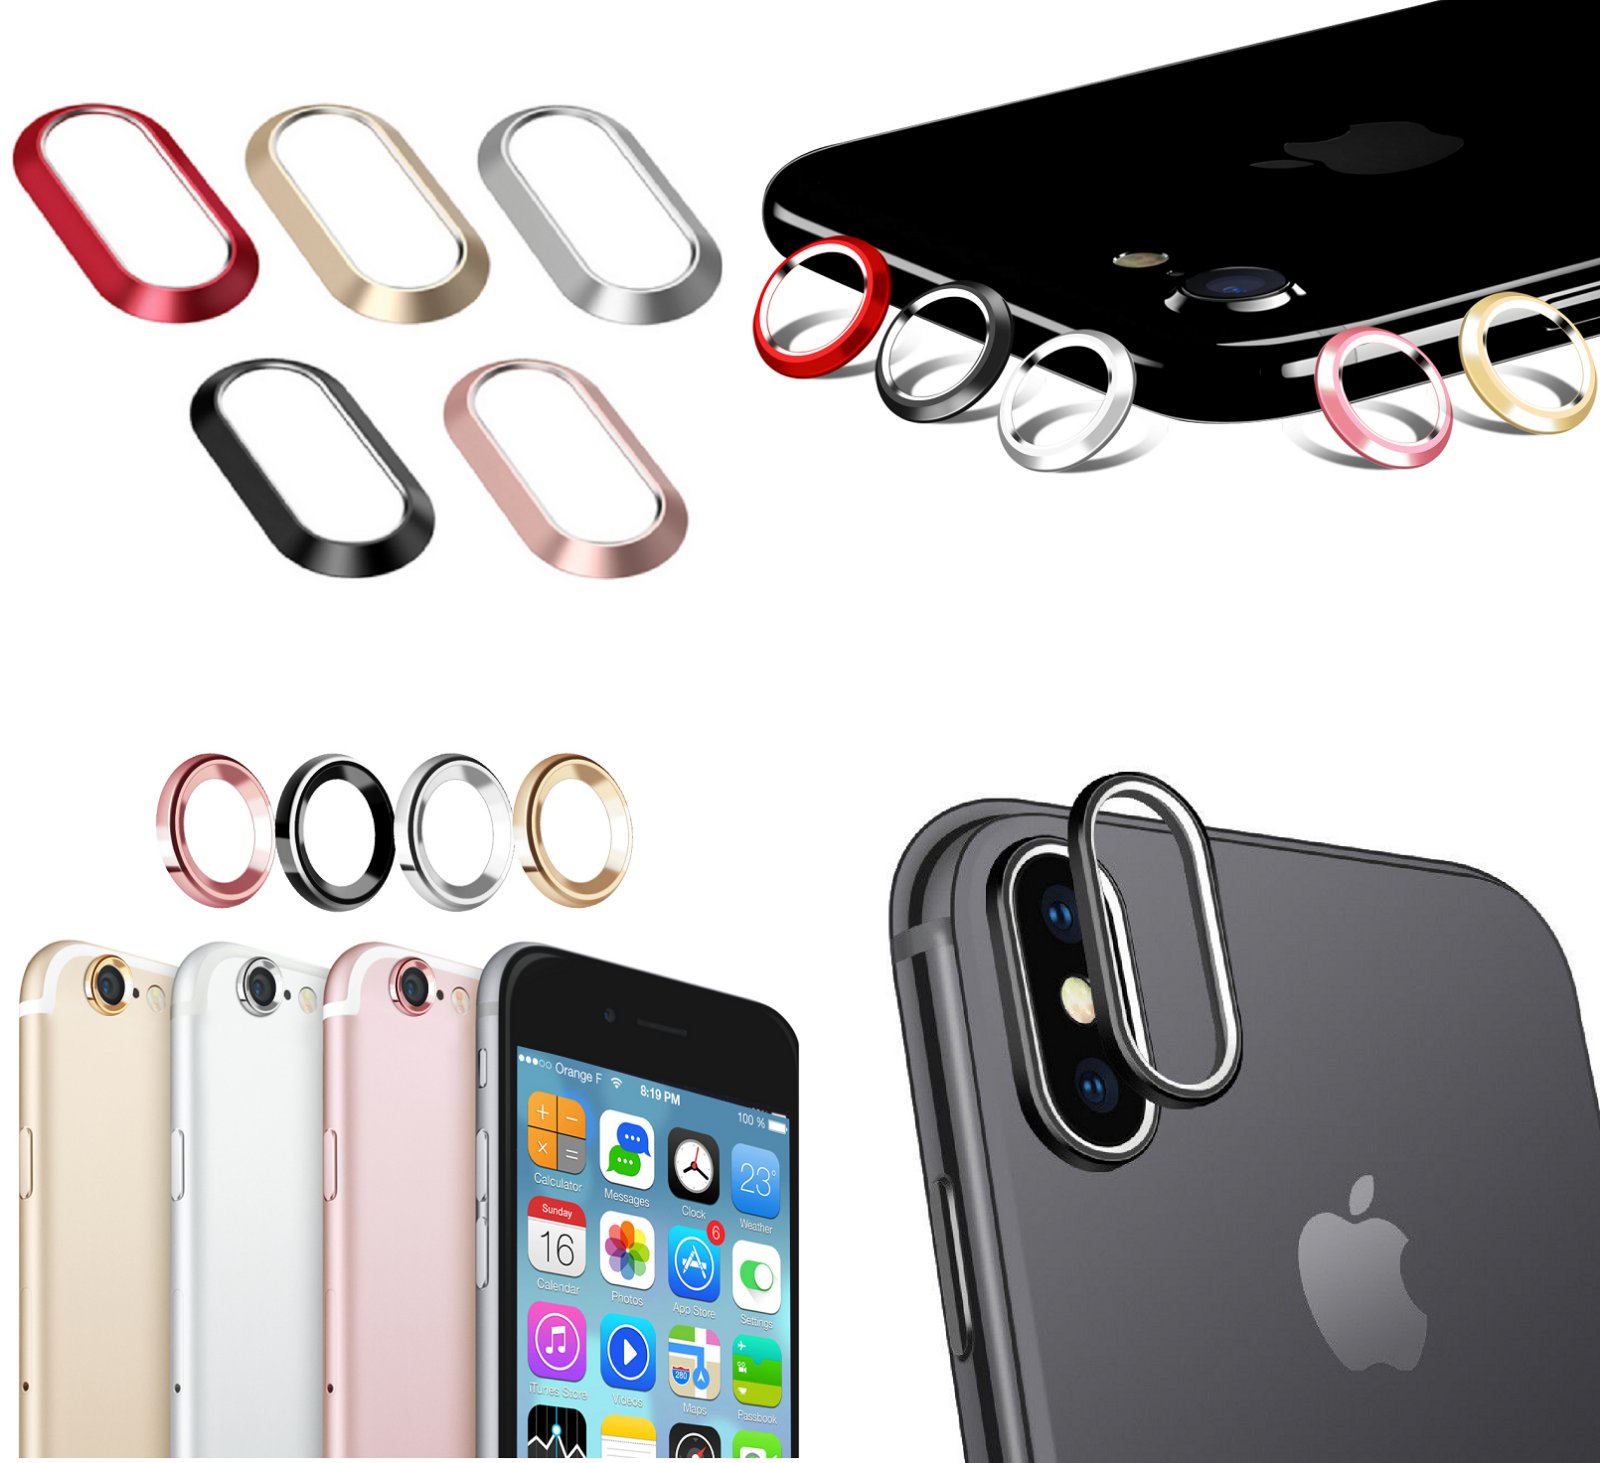 For iPhone 6 6S 7 8 Plus X Rear Lens Protector Ring ***USA Seller** | eBay